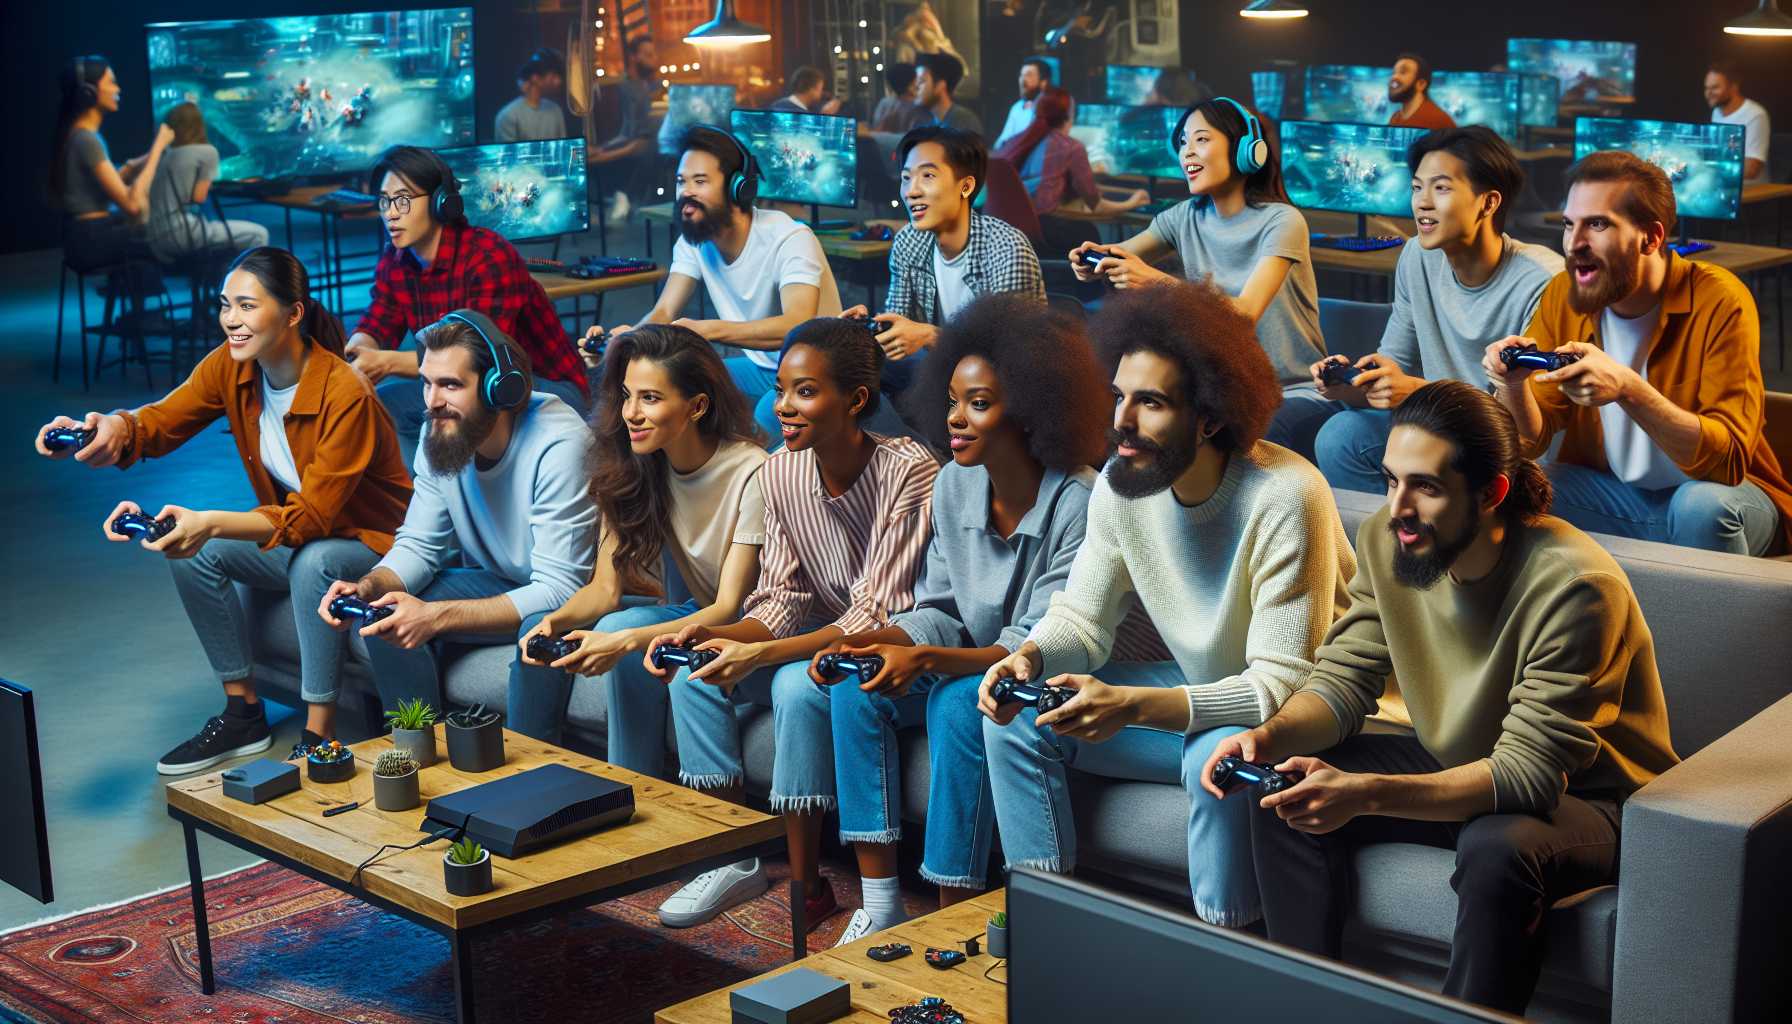 a group of people playing video games together in a room